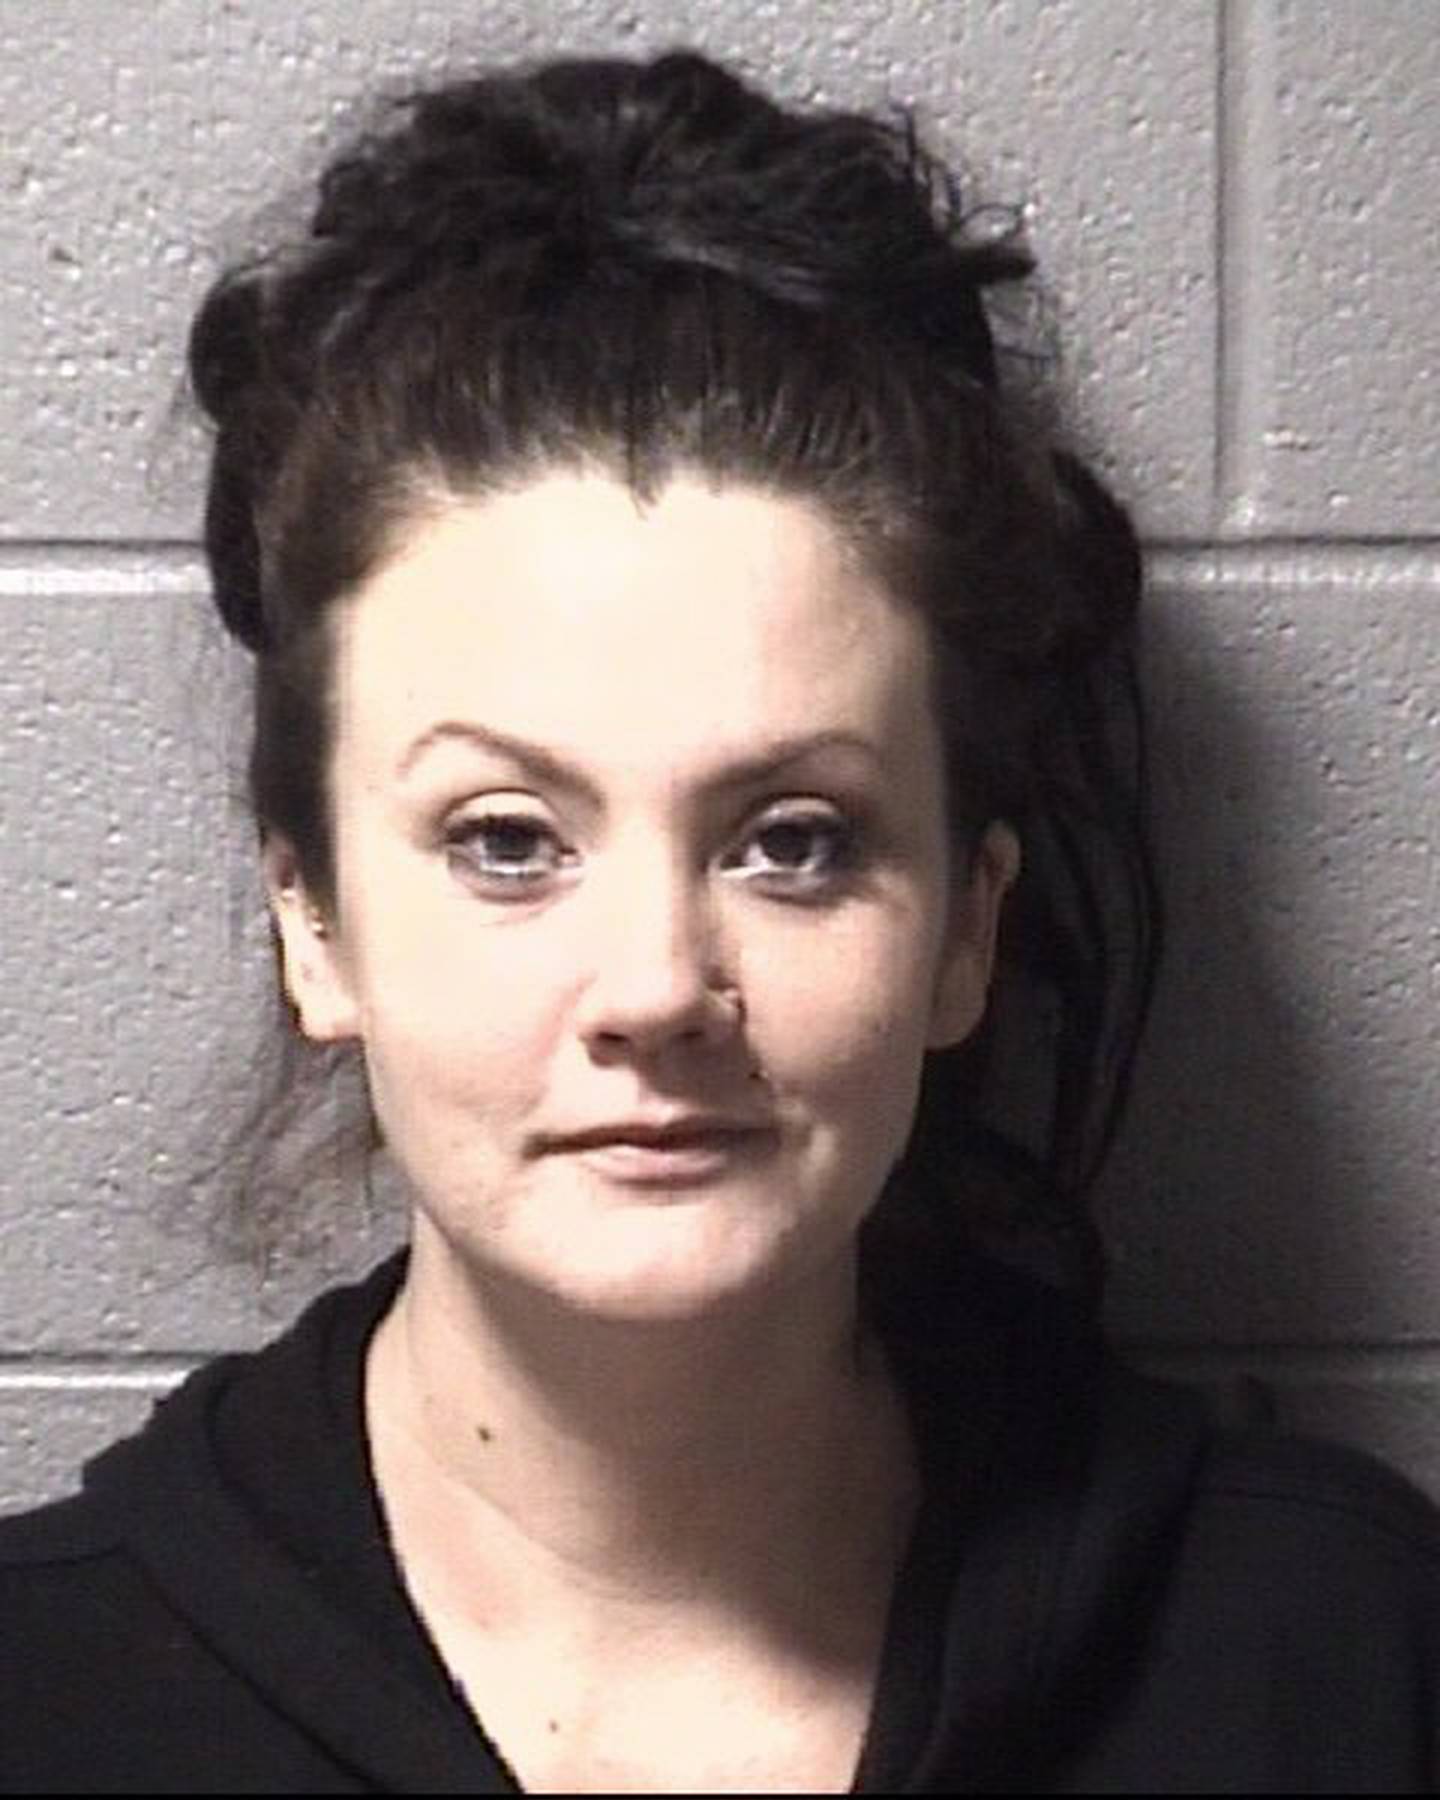 Chynna Daugherty, now 33, of Genoa, shown here in this 2022 photo provided by the DeKalb County Jail. Daugherty pleaded guilty Wednesday, Feb. 28, 2024, to two counts of aggravated DUI causing death, one count each for Christopher Henning and Amanda Henning, of Sycamore, after a Feb. 12, 2022 crash. Daugherty was sentenced to 12 years in prison.